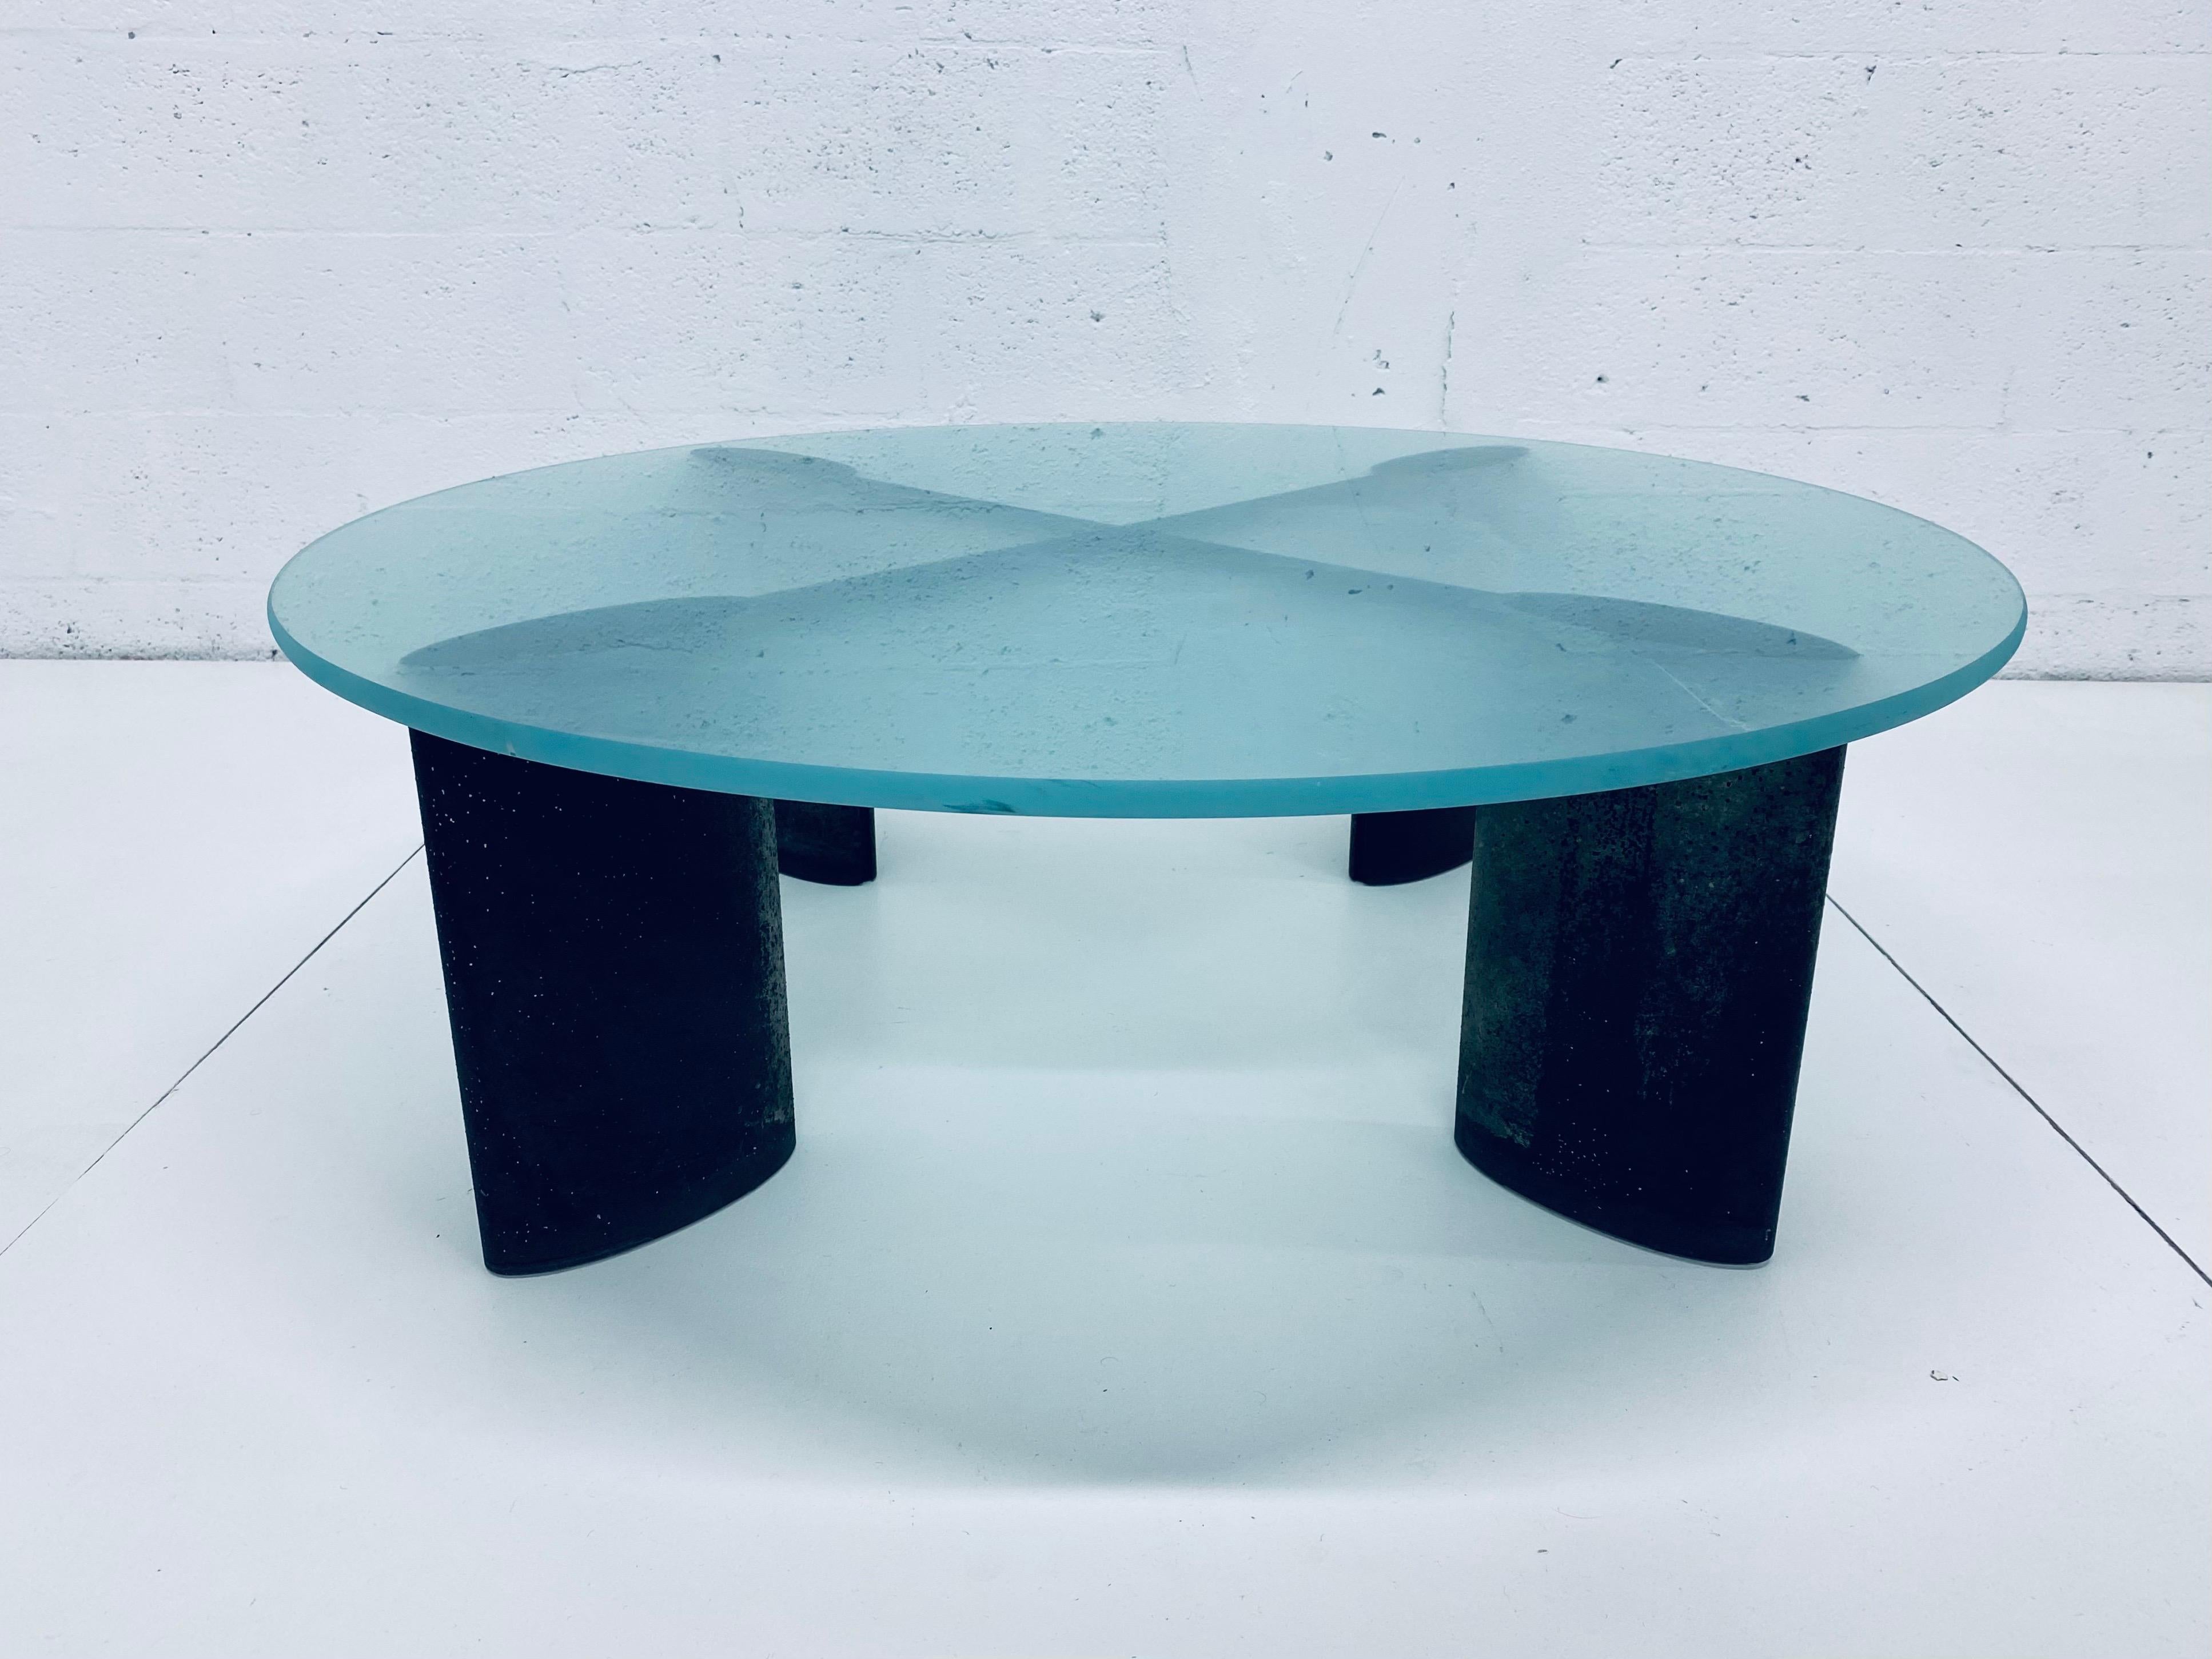 The Mirage coffee or cocktail table was designed by Piotr Sierakowski in the brutalist manner and is complimented by a 5/8